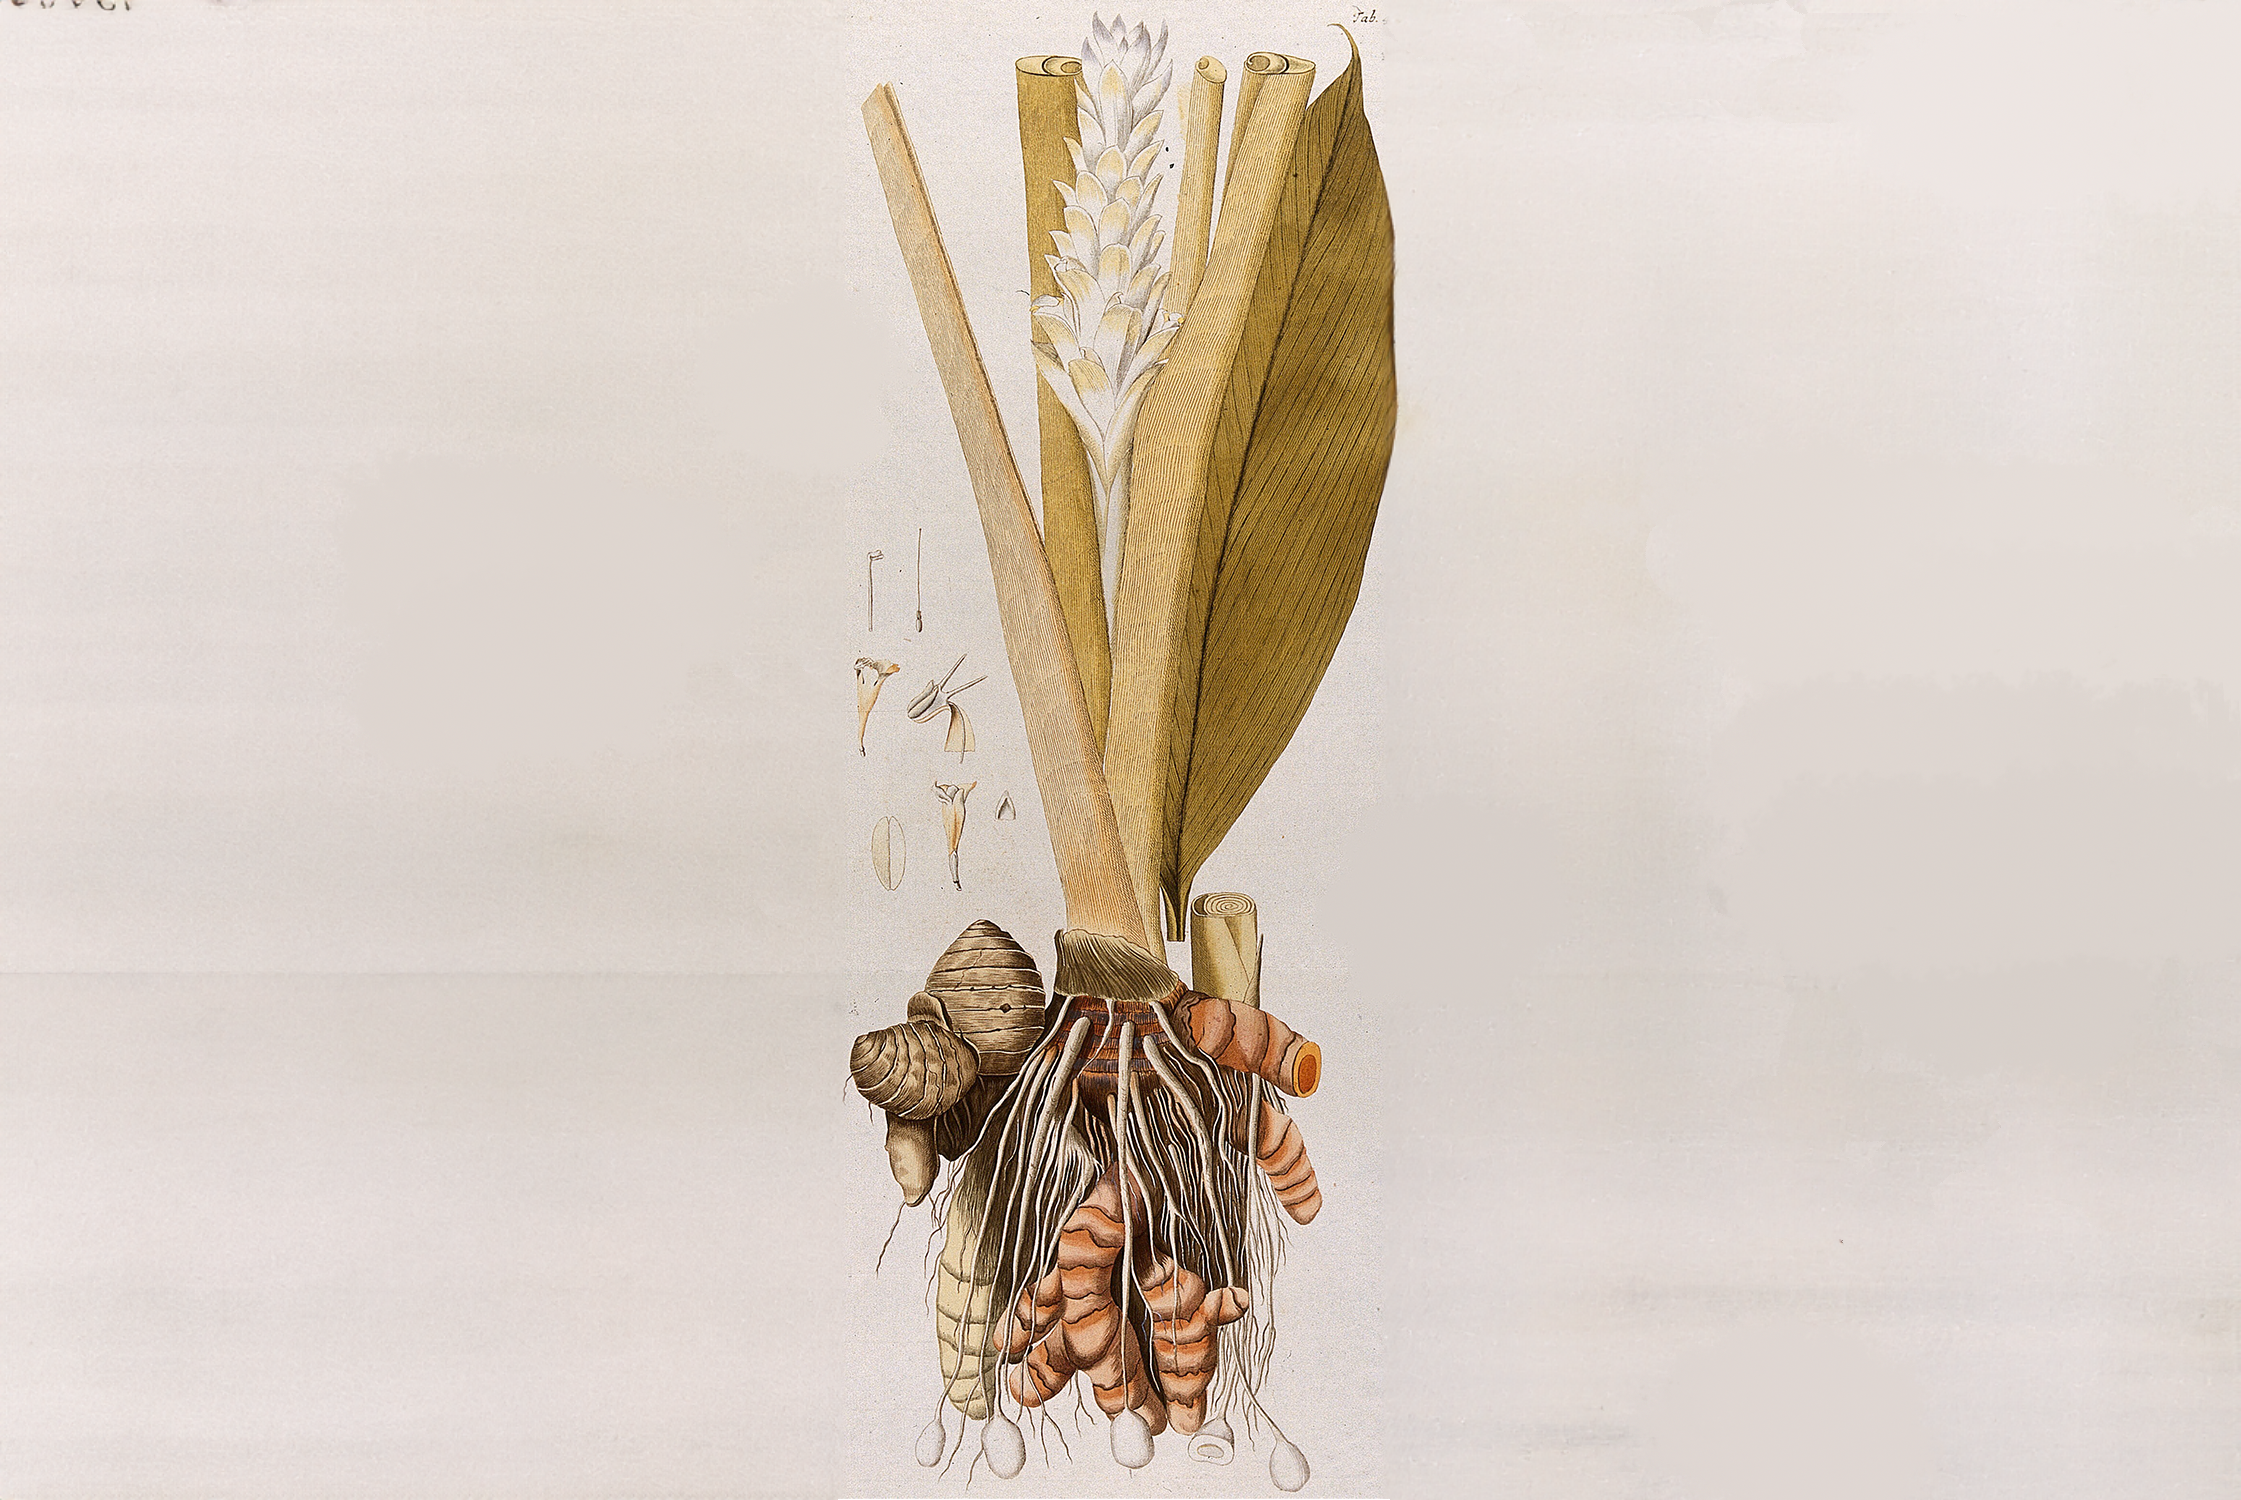 Tumeric (Curcuma longa L.): rhizome with flowering stem and separate leaf and floral segments. Coloured engraving after F. von Scheidl, 1776